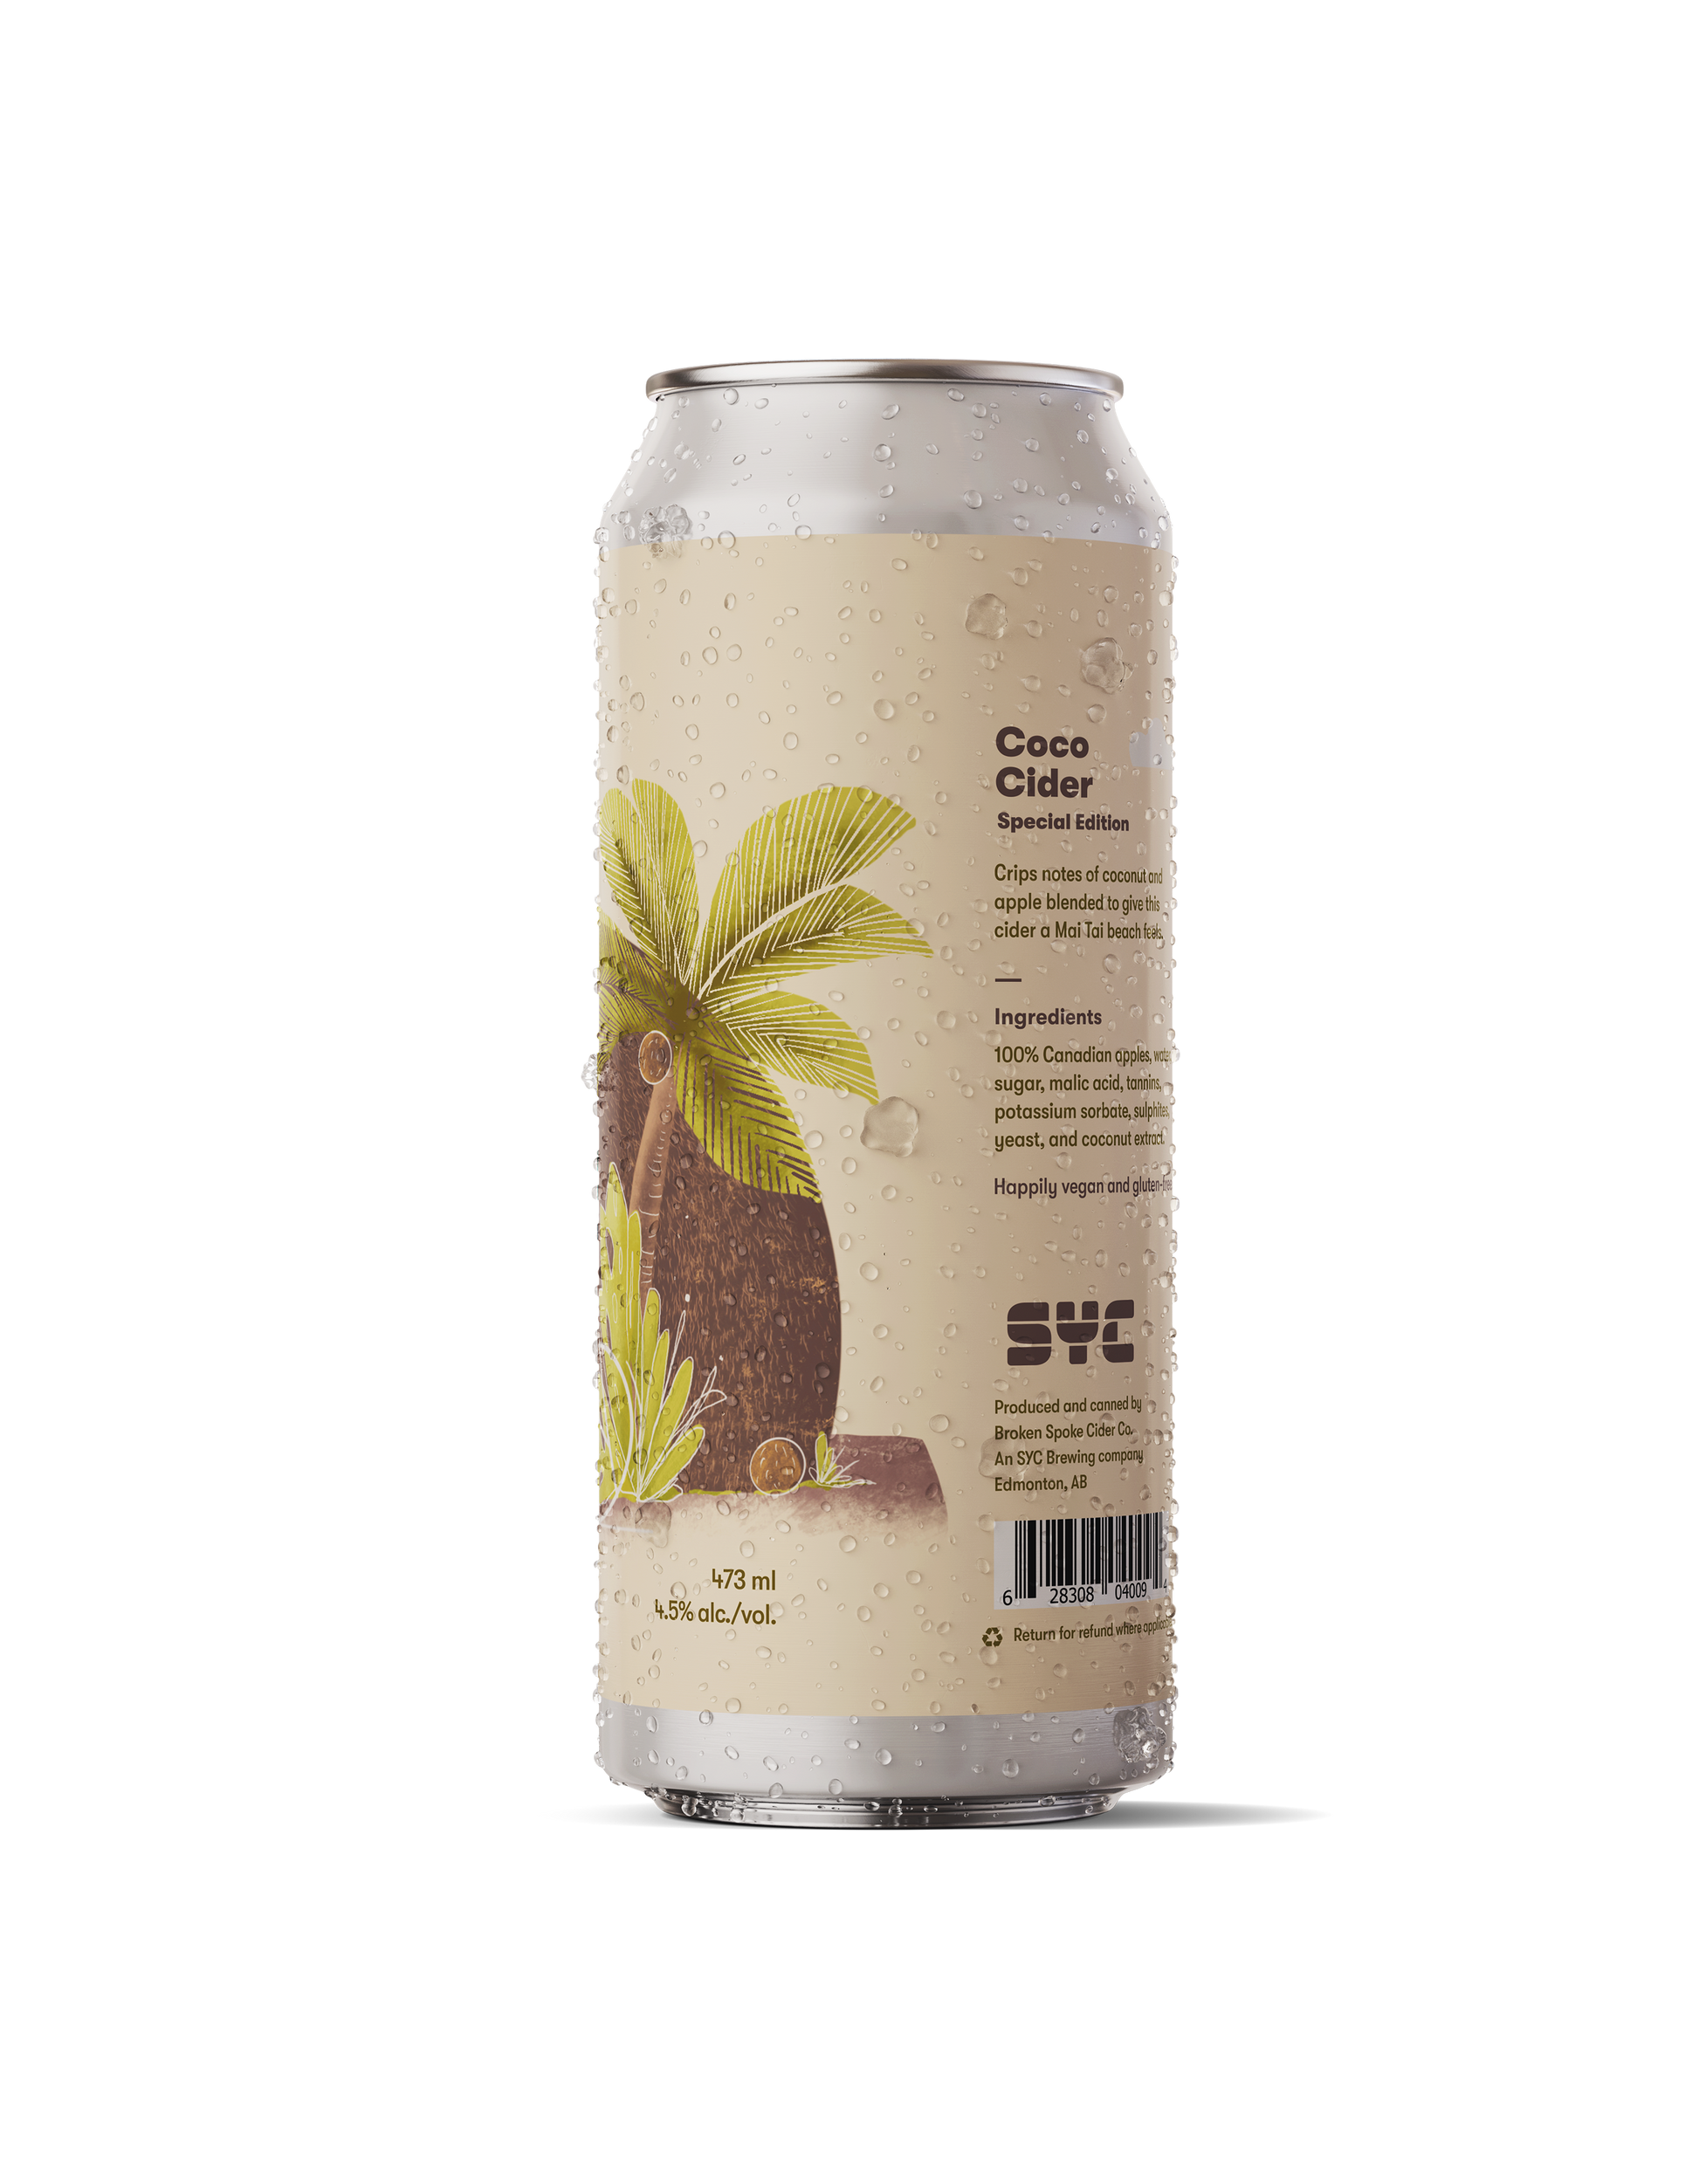 Right of Can Coconut Cider